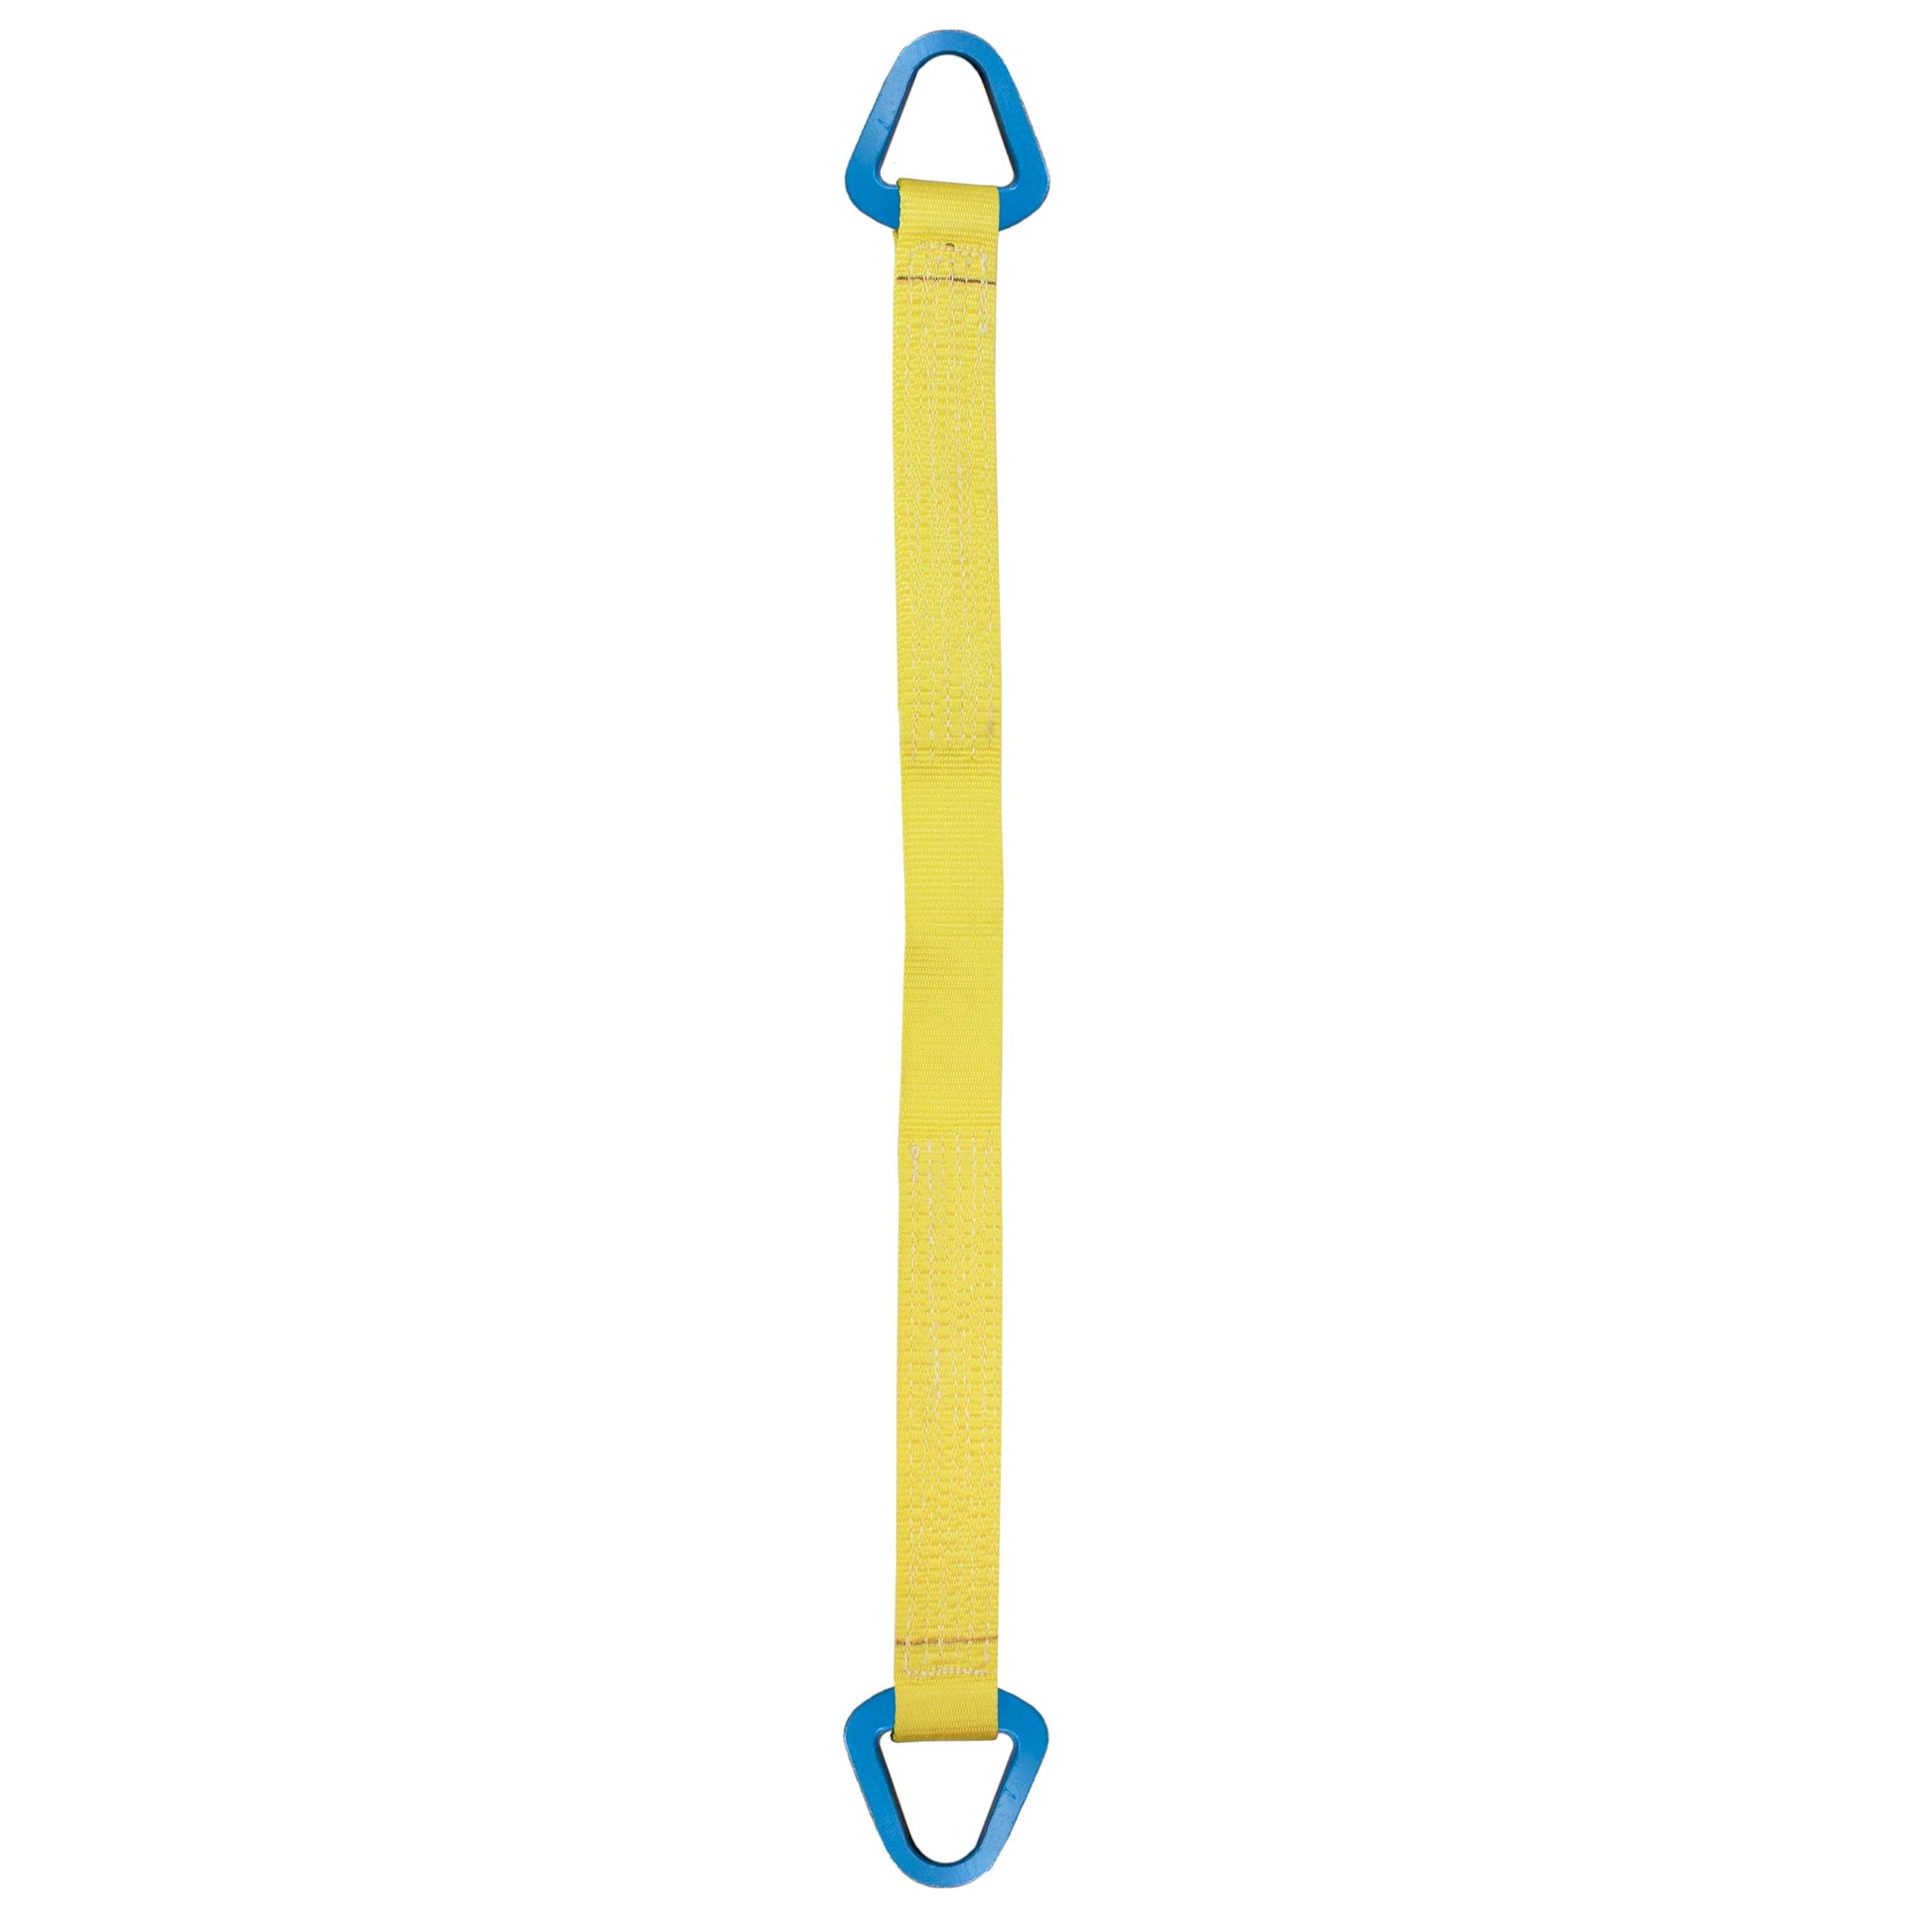 Nylon Lifting Sling Triangle 12 inch x 16 foot 1ply image 1 of 2